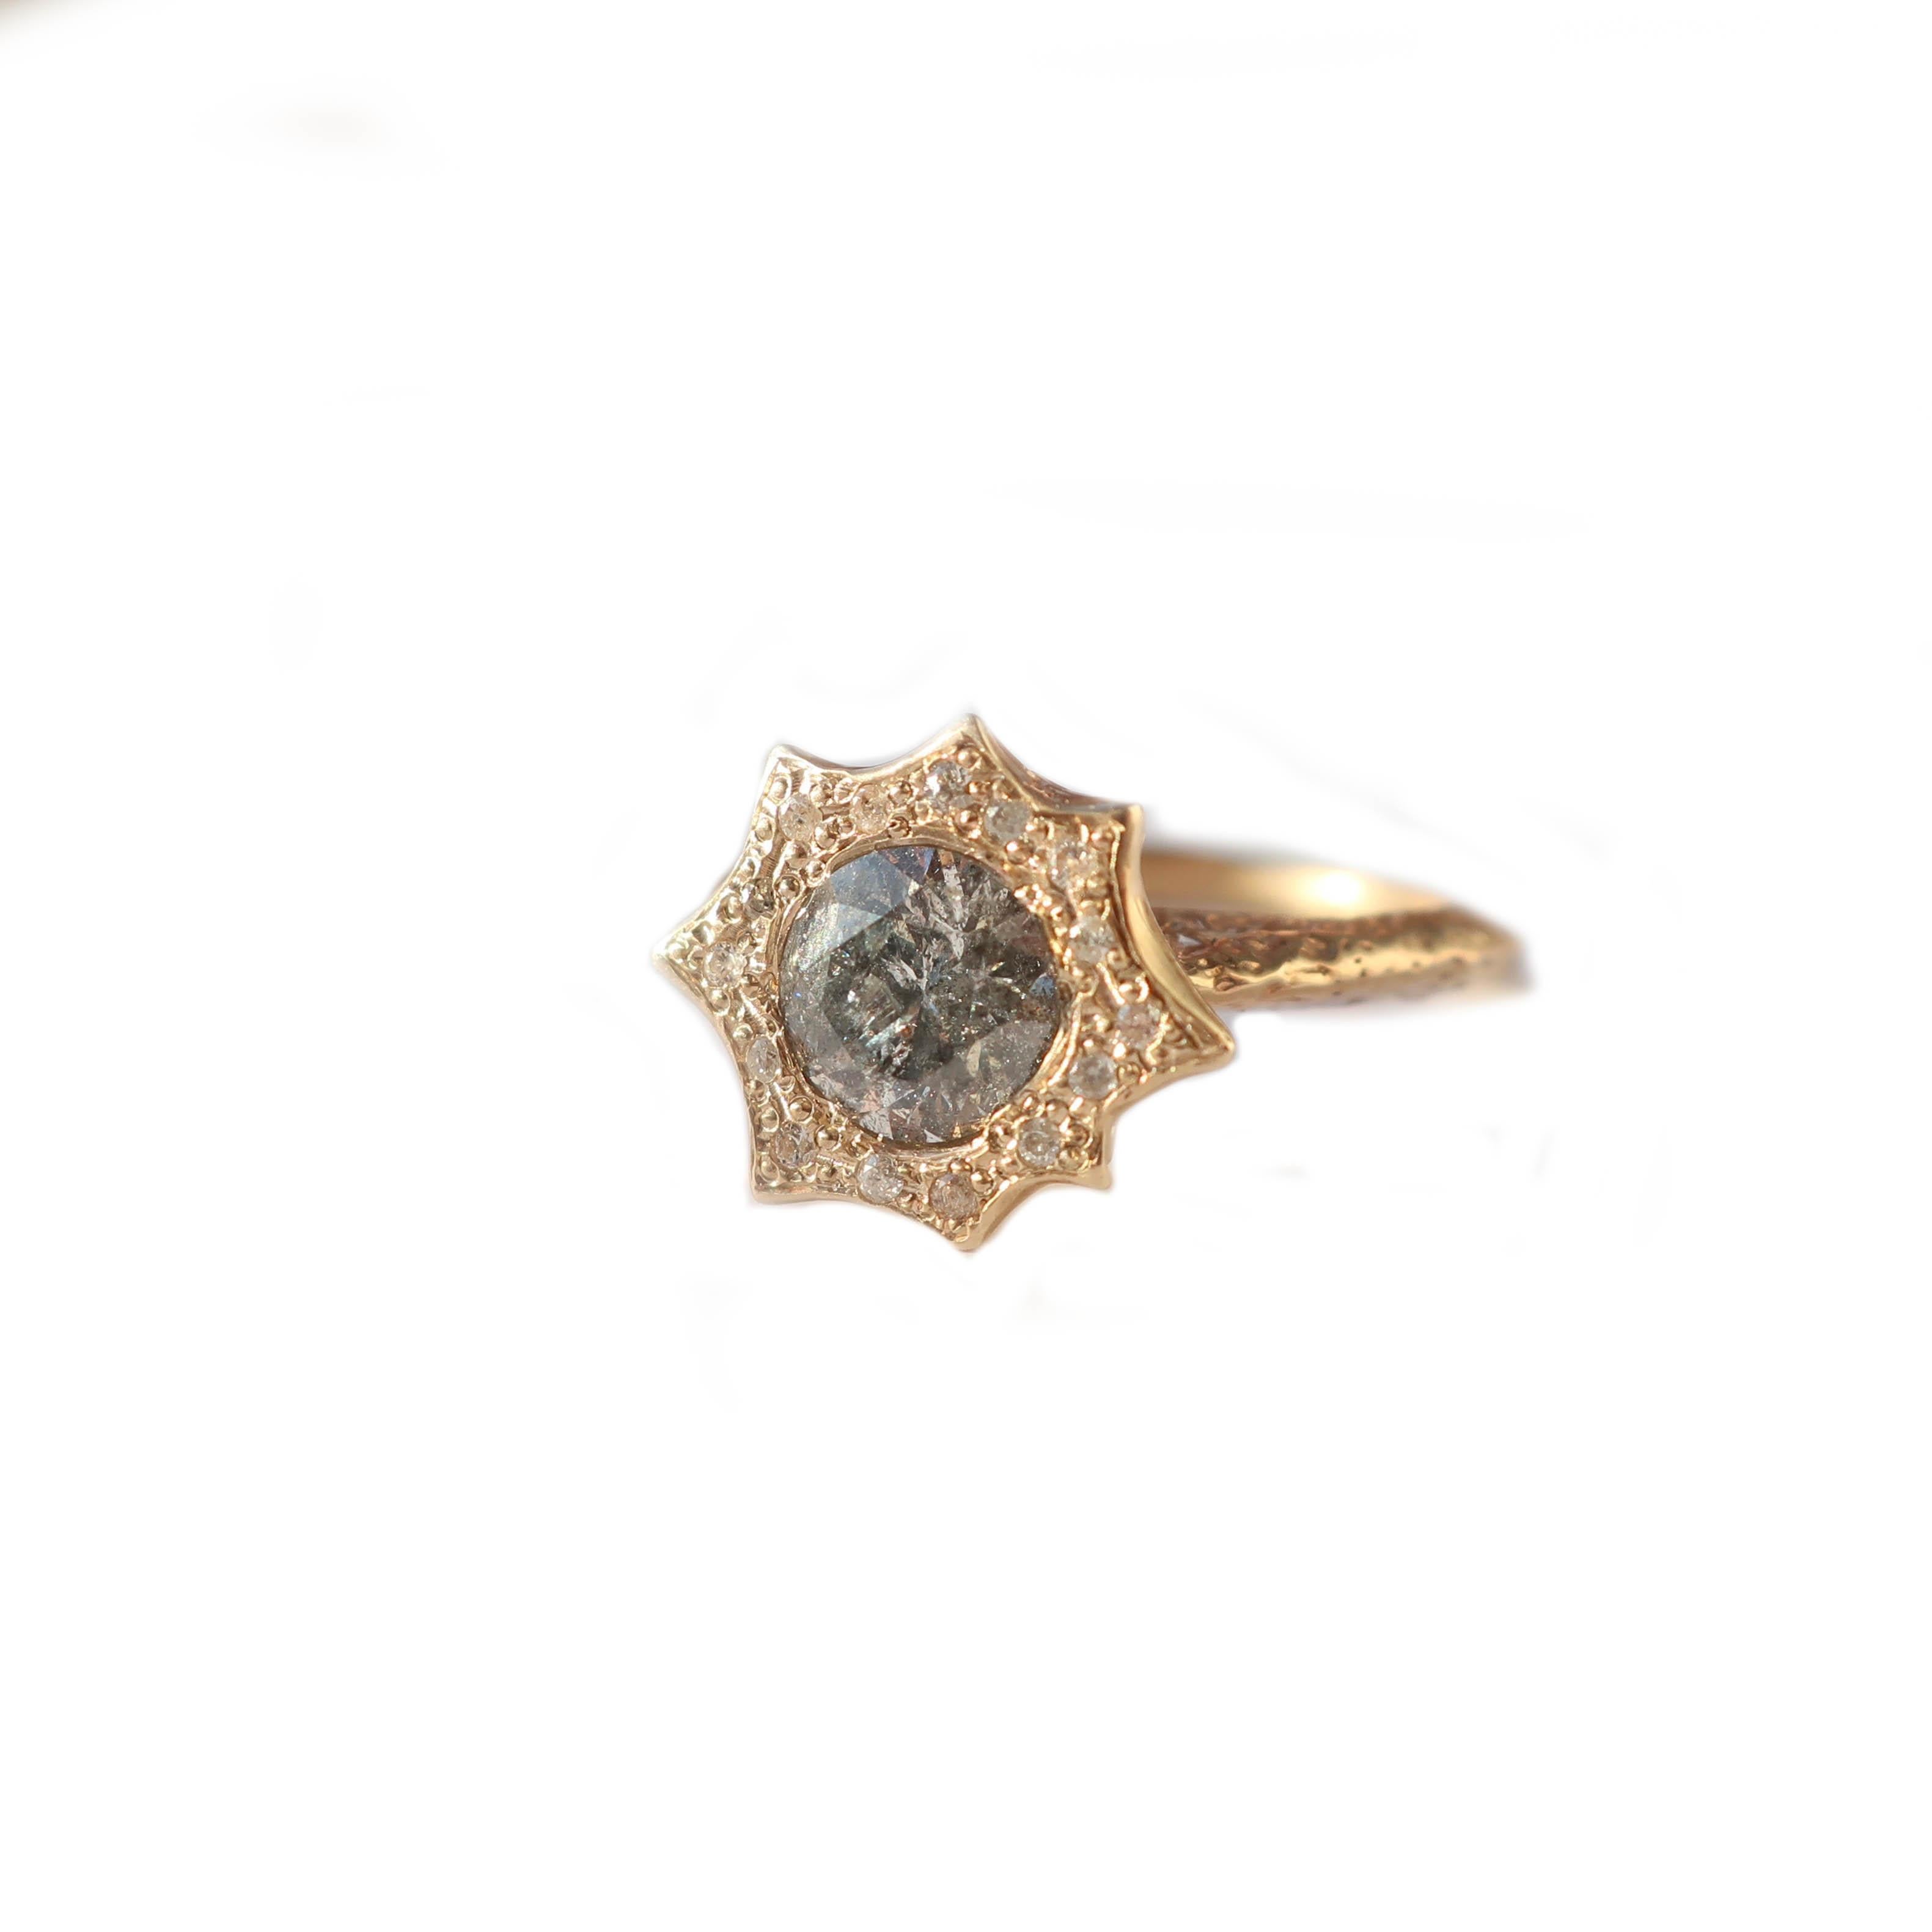 Solid 14K yellow gold ring with a stunning 6mm galaxy diamond with natural inclusions of black and grey. , This ring features natural texturing throughout. A pave champagne diamond halo surrounds the center stone. This piece is one of a kind size